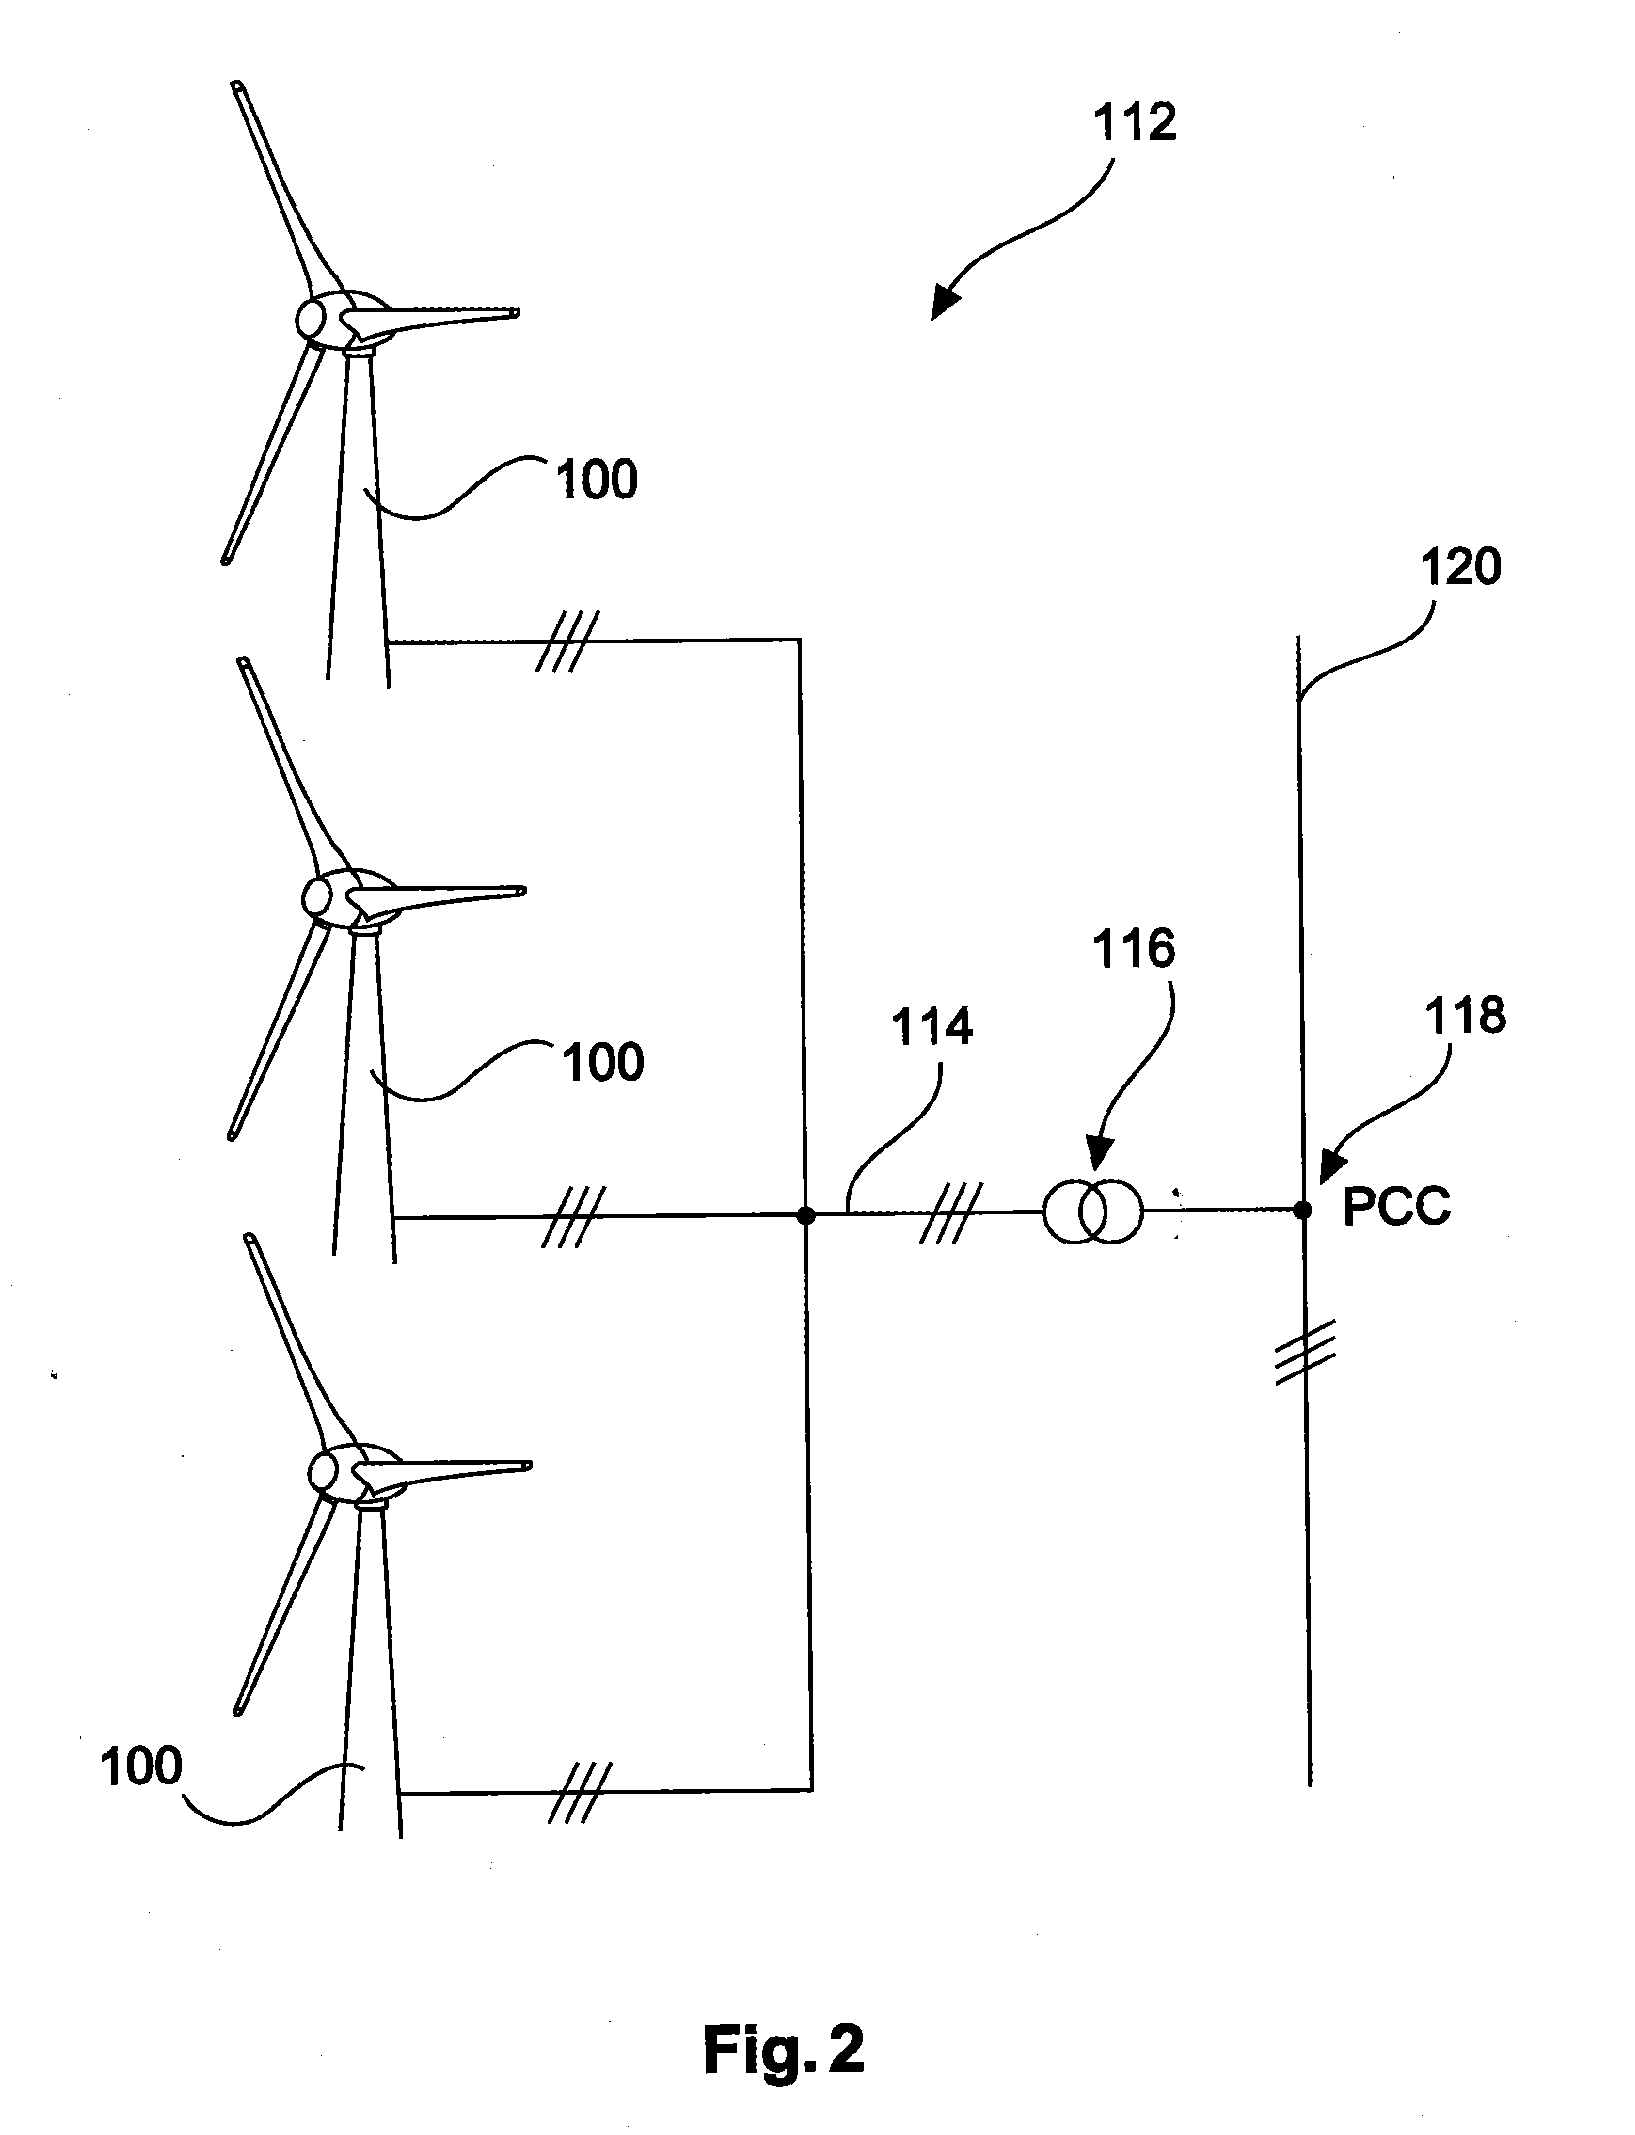 Method for controlling wind turbines